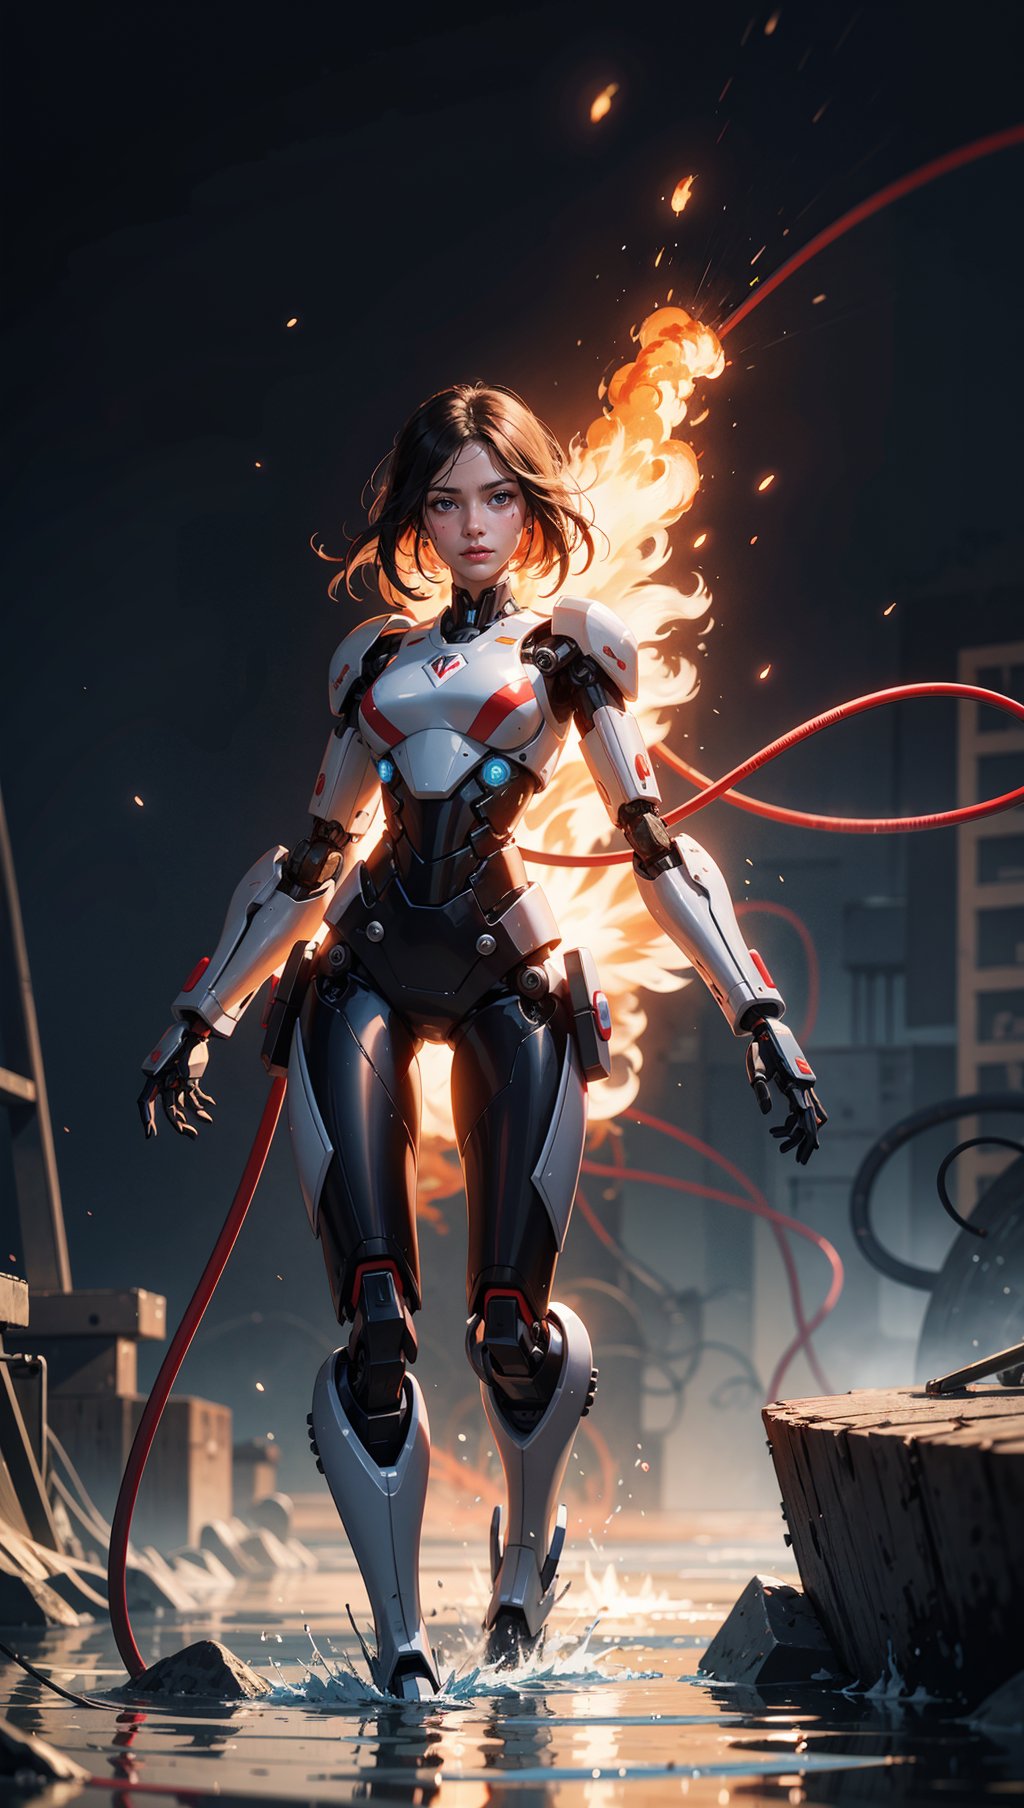 beautiful woman with with a robotic body coming out of oily water that is on fire. wires and particles in the backround